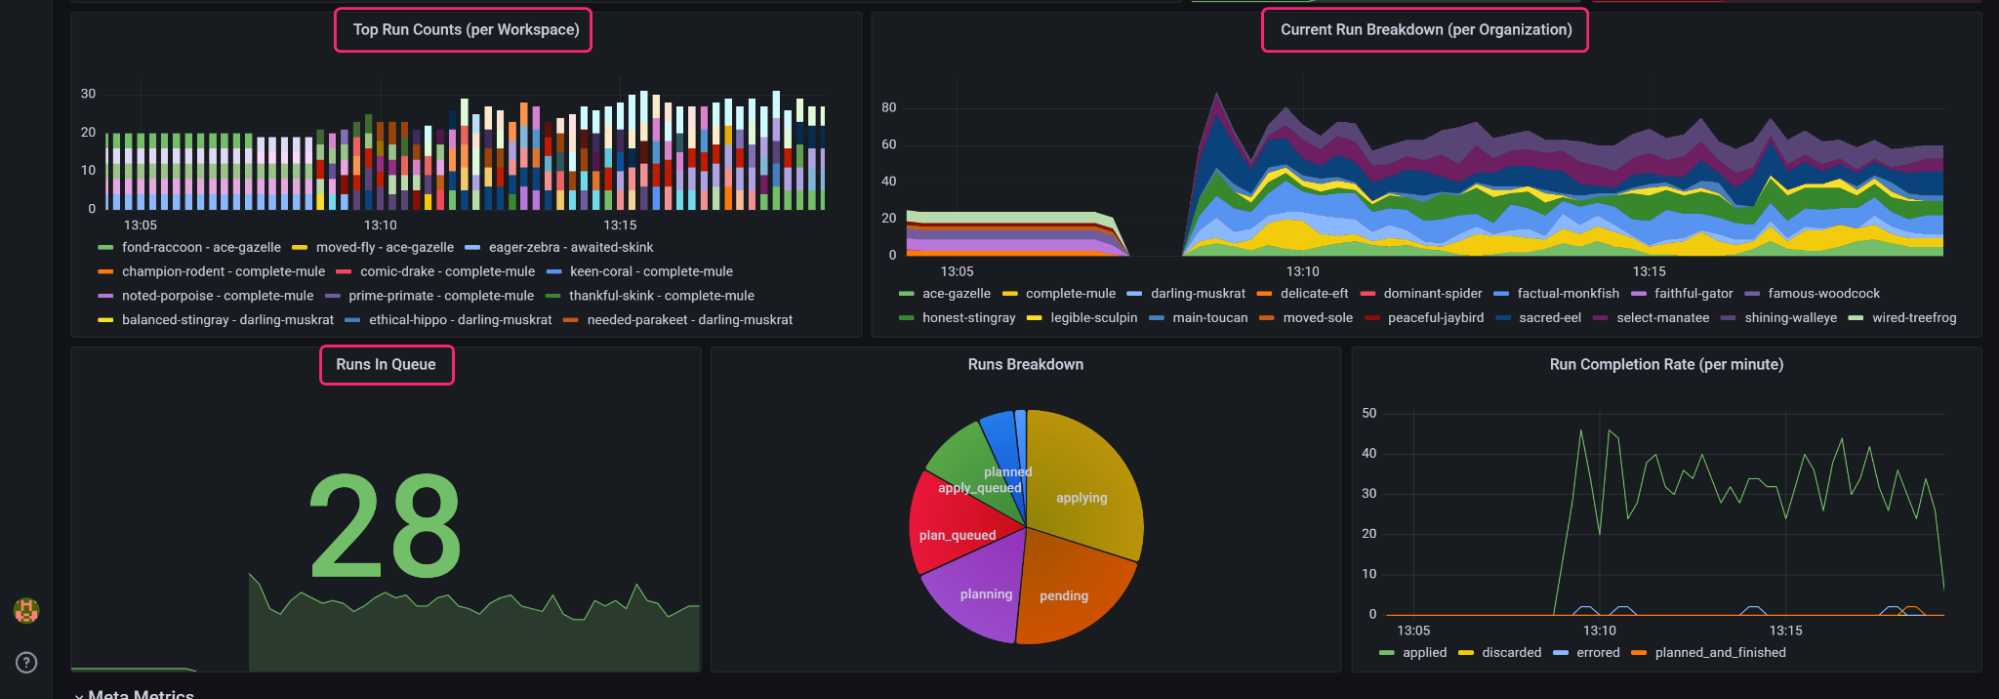 A section of the imported Grafana dashboard showing the top run counts per workspace, current run breakdown per organization, runes in queue, runs breakdown, and run completion rate per minute